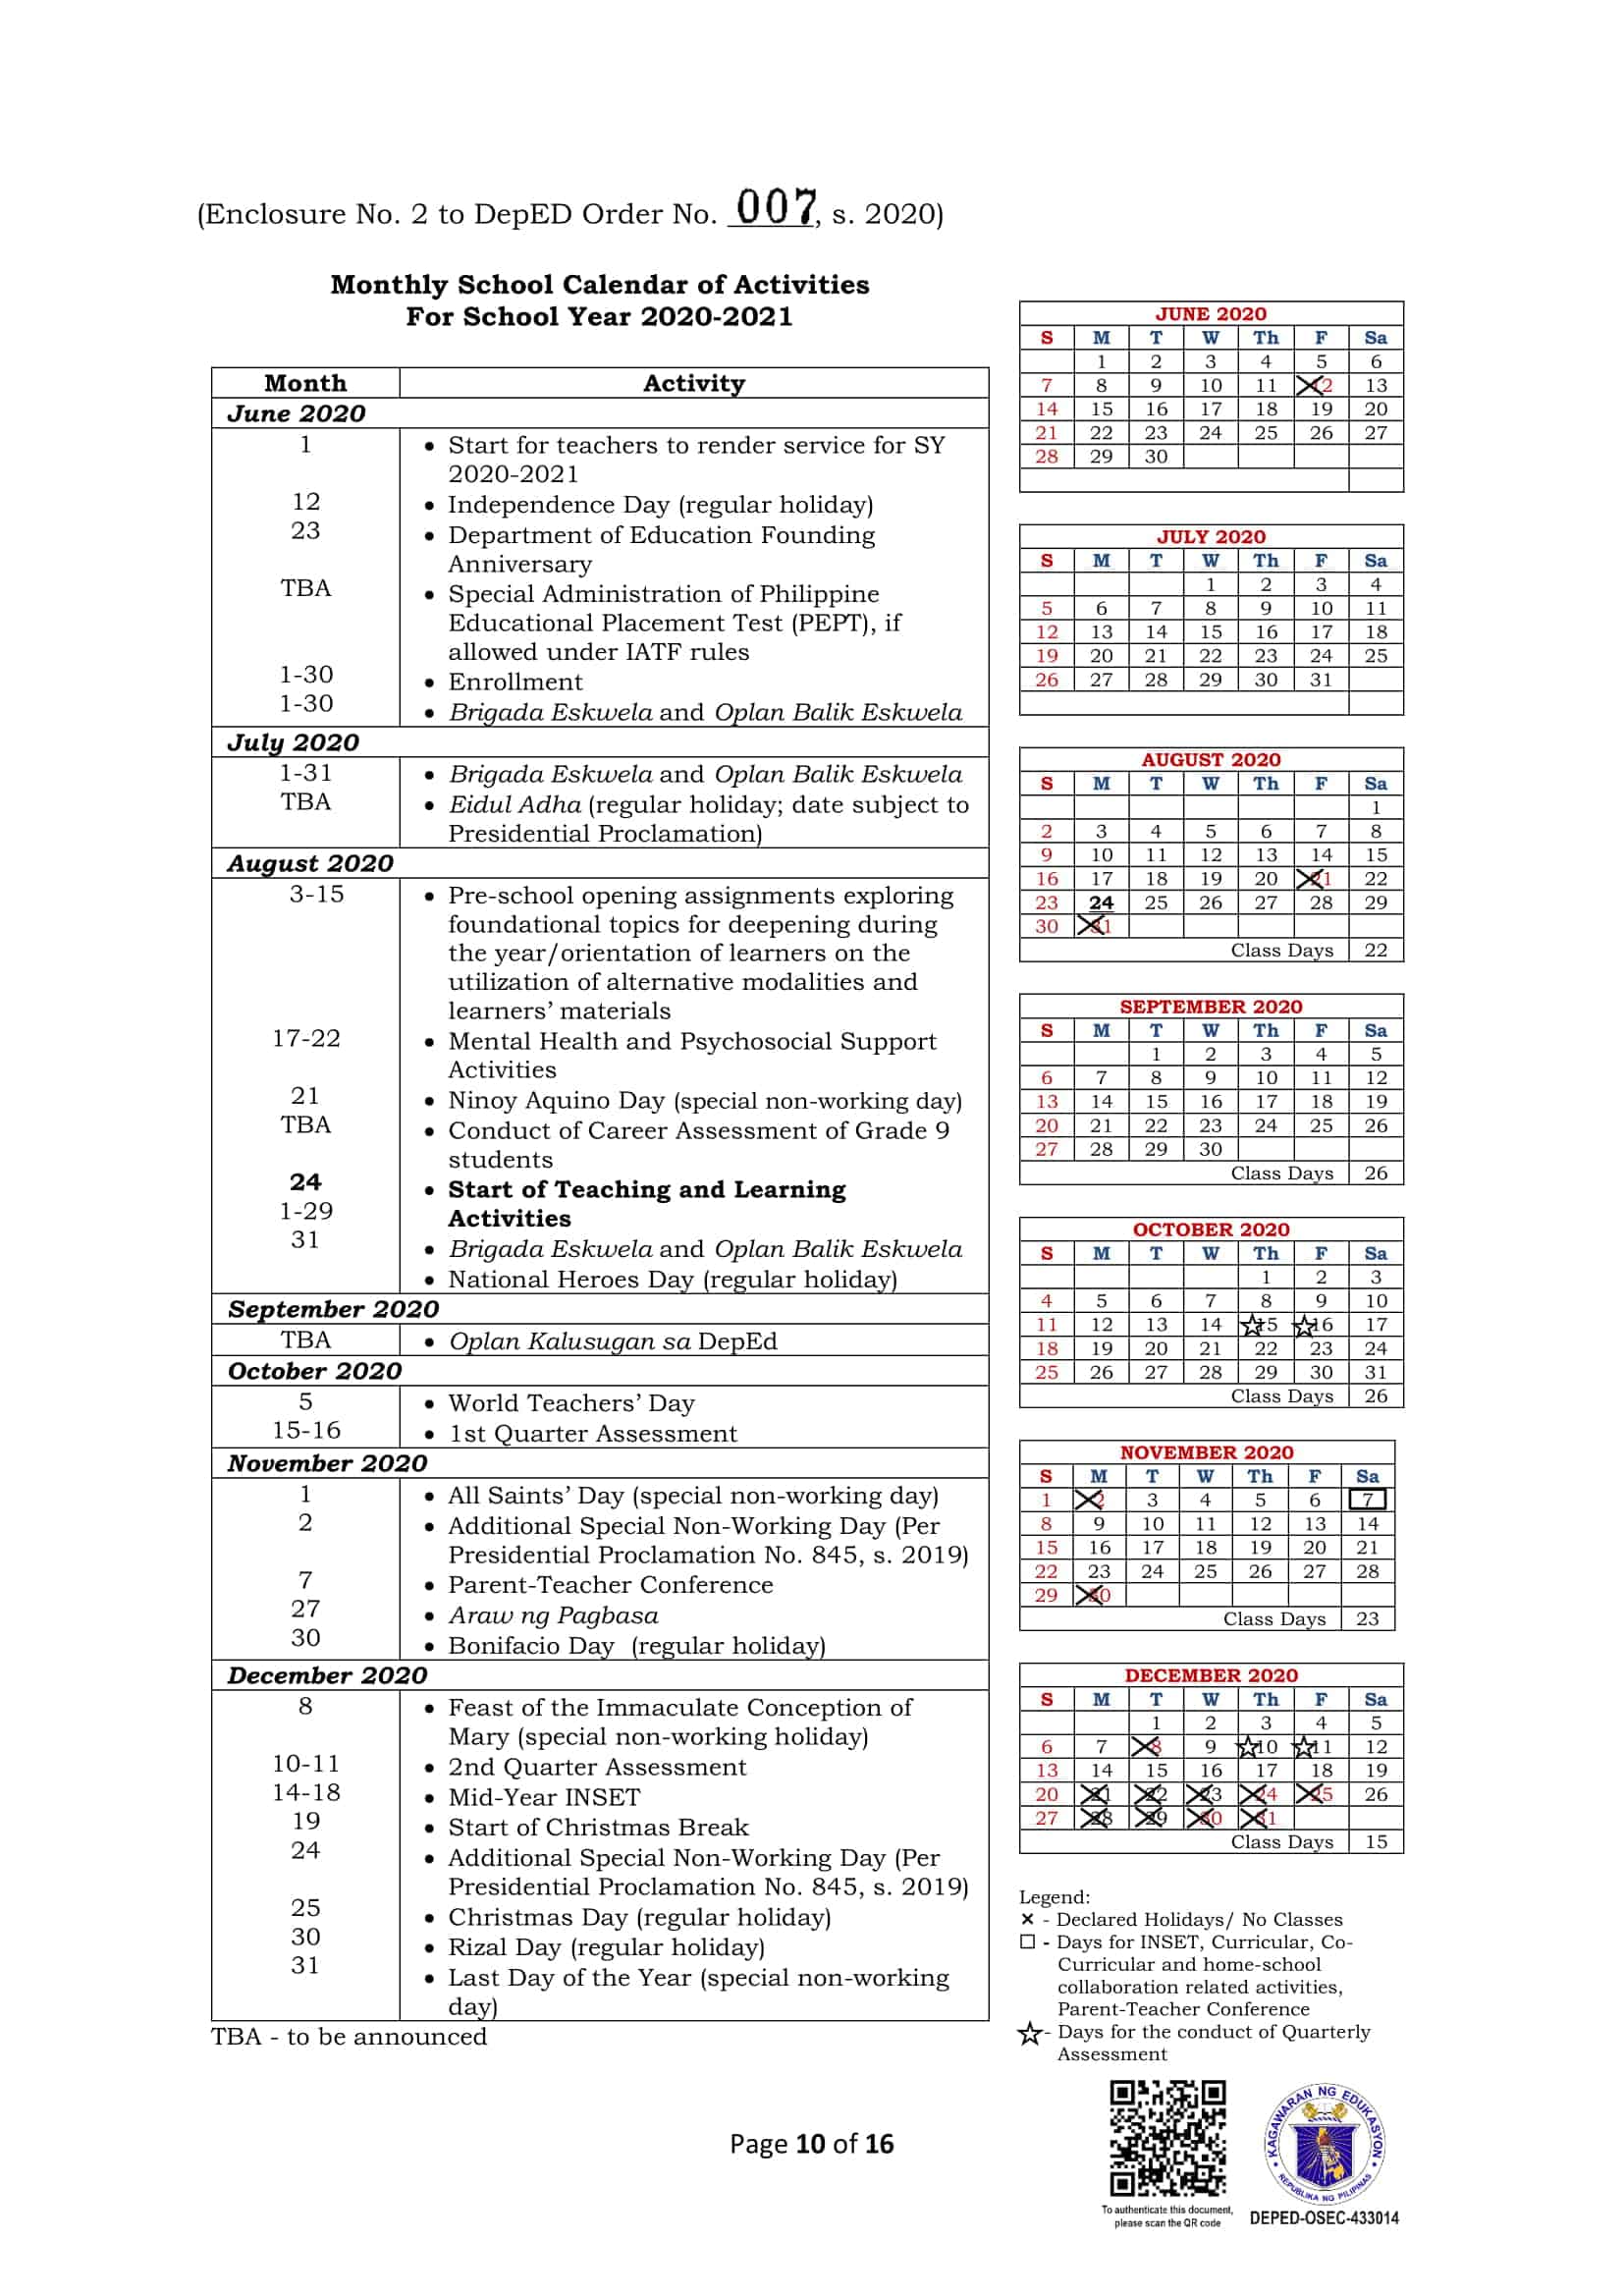 deped-order-no-029-s-2021-school-calendar-and-activities-for-year-2022